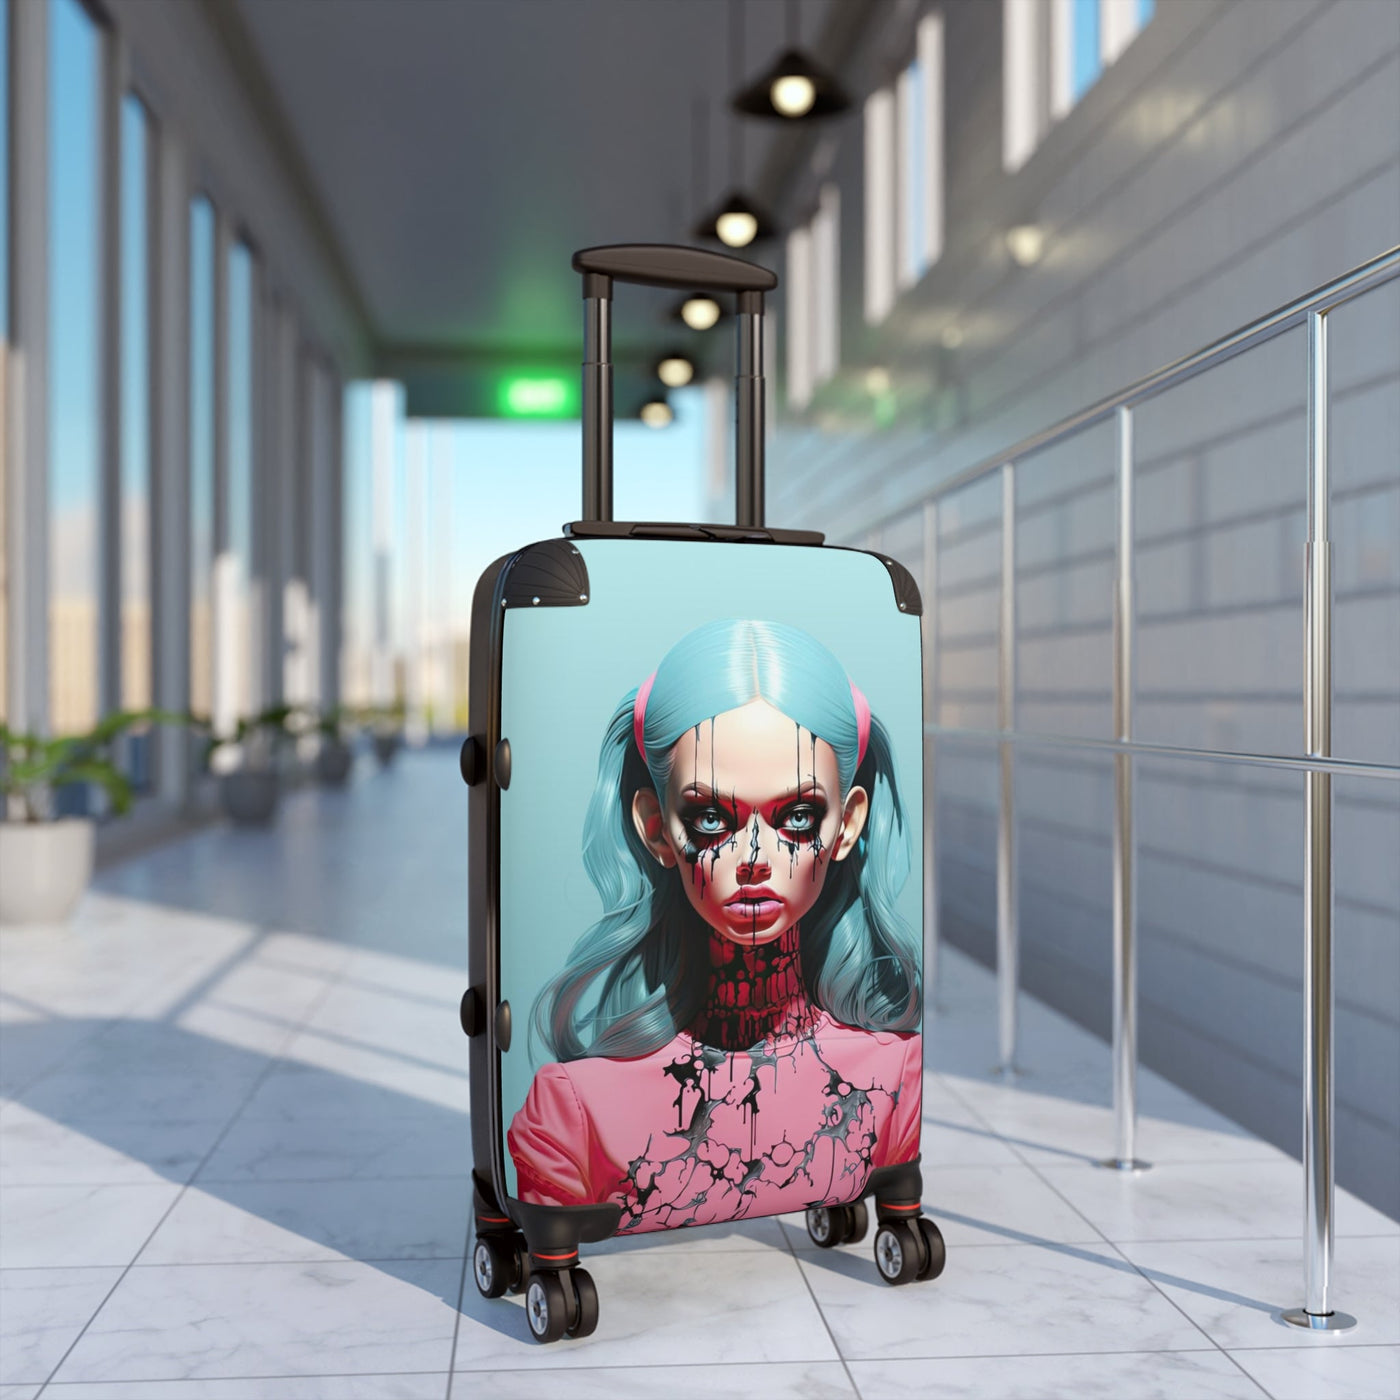 Scary Doll Pop Surreal Travel Suitcase Luggage